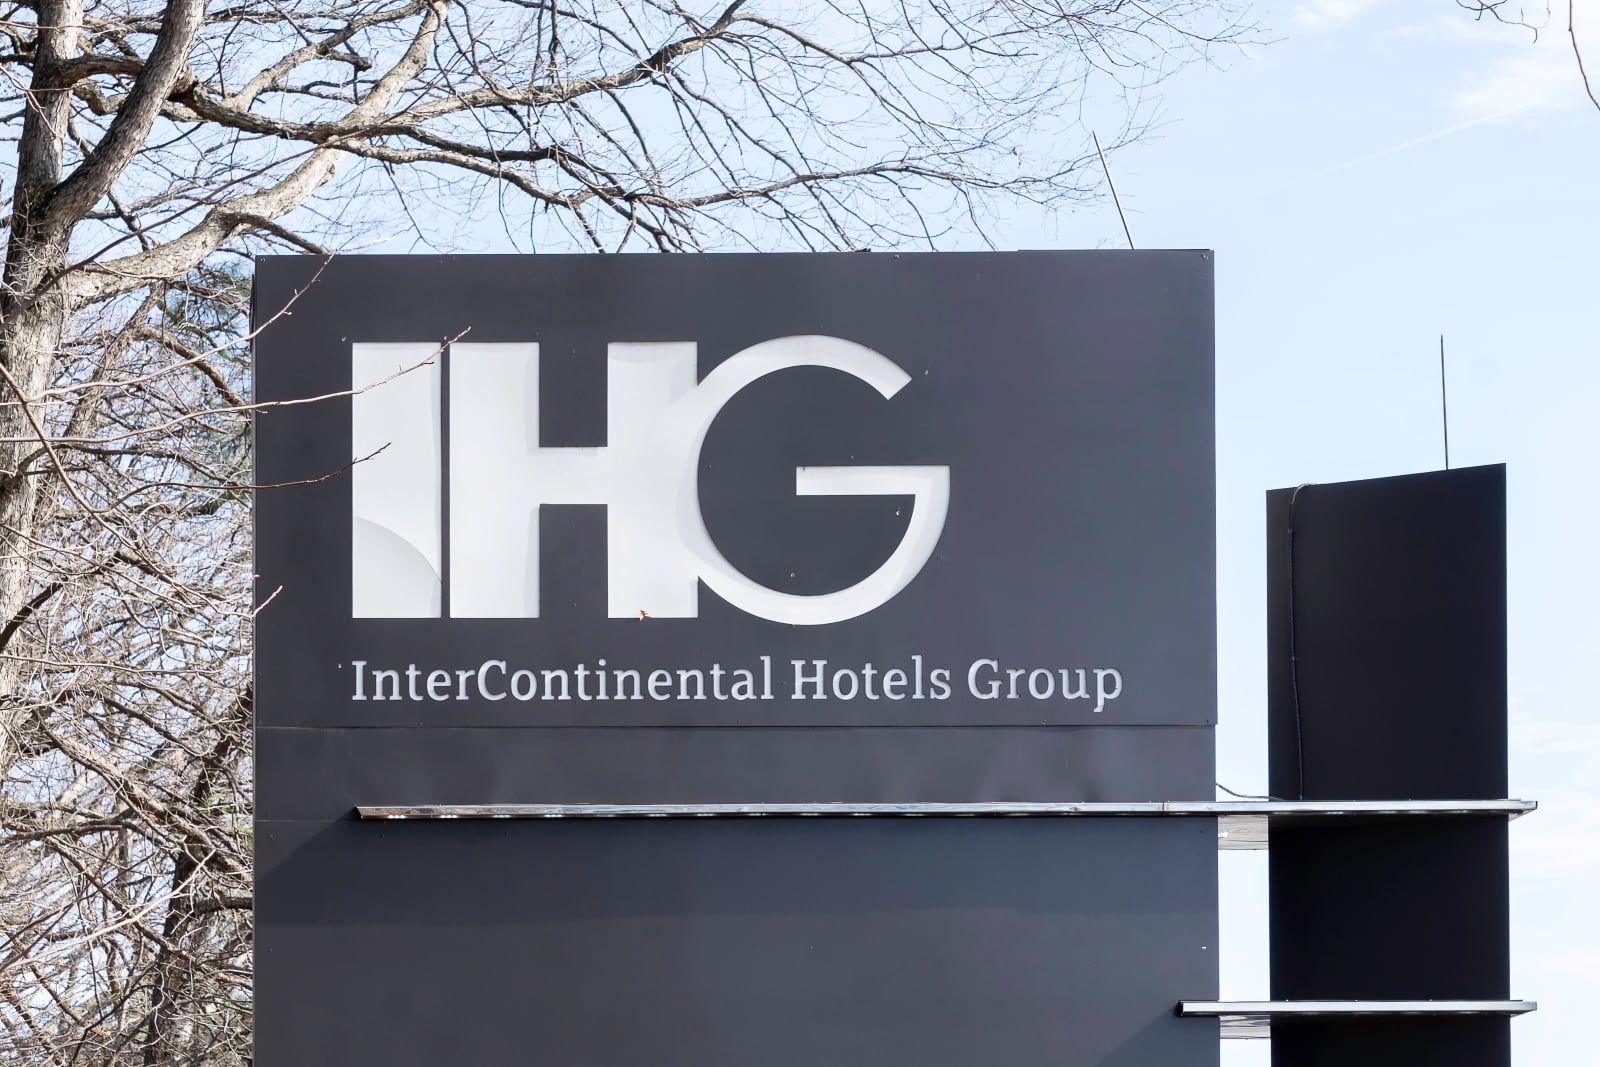 <p><span>IHG Rewards Club, the InterContinental Hotels Group’s loyalty program, offers hotel stays points, which can be redeemed for free nights, gift cards, and more. The program is known for its wide range of participating hotels, from luxury properties to family-friendly accommodations. </span></p> <p><span>Members can earn points quickly through hotel stays, promotions, and partnerships, and the points can be used for a variety of rewards, including hotel stays, airline miles, and merchandise. Elite members enjoy additional benefits like room upgrades and late check-out, enhancing the overall travel experience. </span></p> <p><b>Insider’s Tip: </b><span>Use IHG’s Points & Cash option to book stays even if you don’t have enough points for the full amount.</span></p>